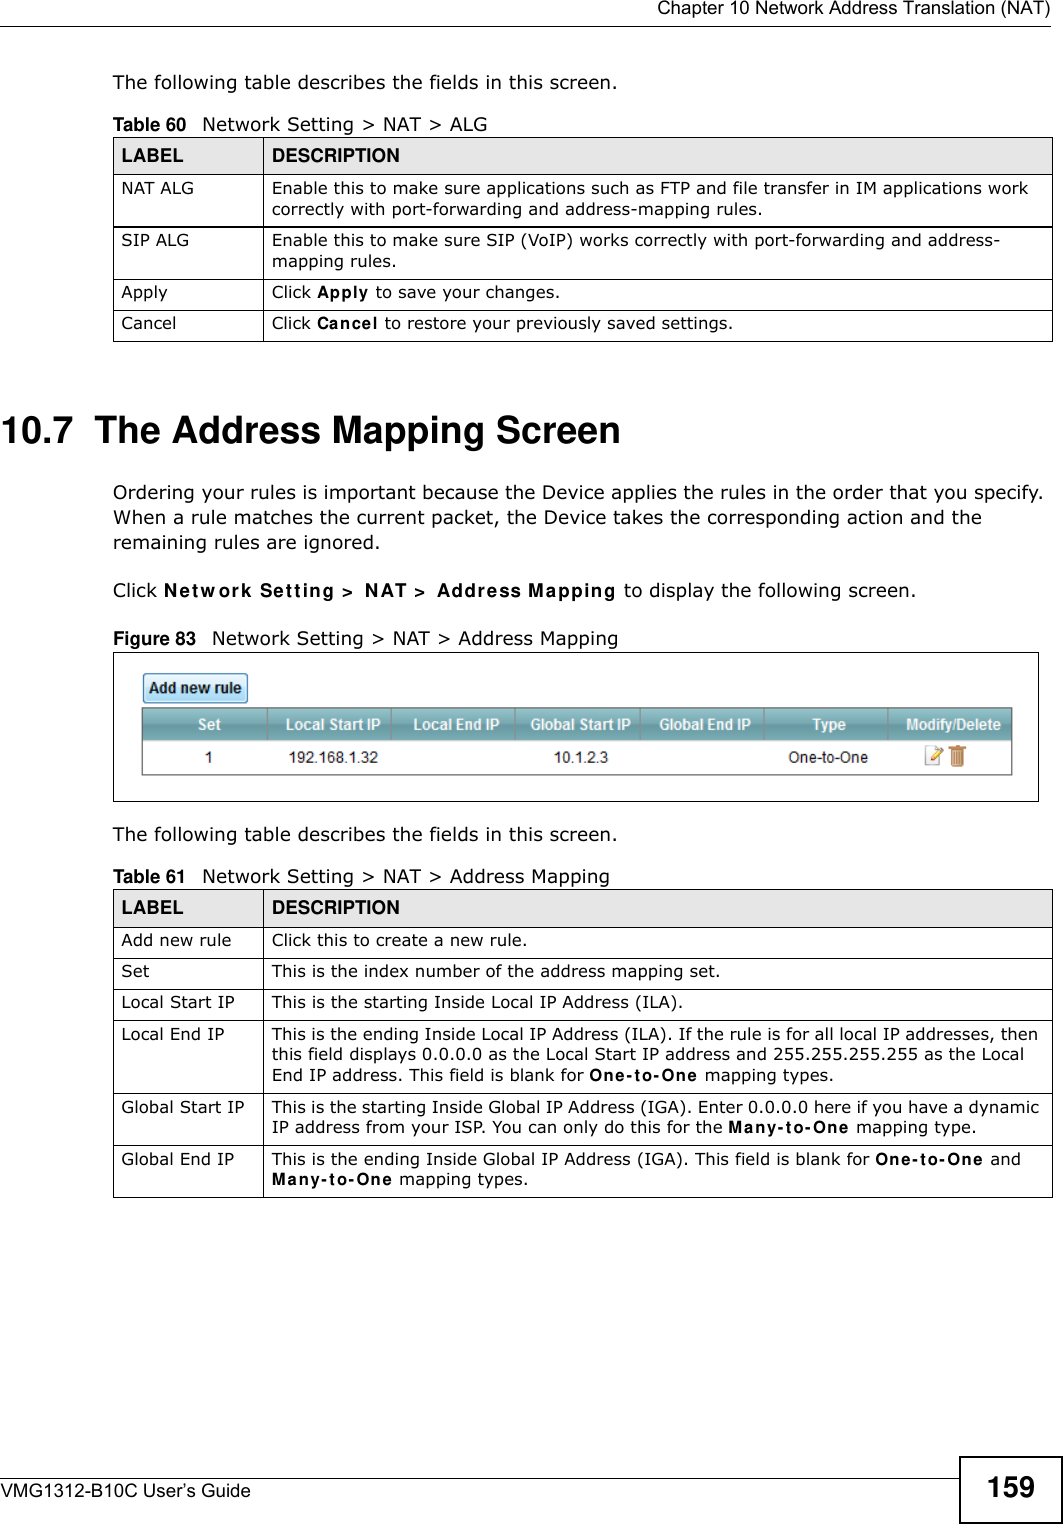  Chapter 10 Network Address Translation (NAT)VMG1312-B10C User’s Guide 159The following table describes the fields in this screen.10.7  The Address Mapping ScreenOrdering your rules is important because the Device applies the rules in the order that you specify. When a rule matches the current packet, the Device takes the corresponding action and the remaining rules are ignored. Click N et w ork  Set t in g &gt;  N AT &gt;  Addr ess M a ppin g to display the following screen. Figure 83   Network Setting &gt; NAT &gt; Address MappingThe following table describes the fields in this screen.Table 60   Network Setting &gt; NAT &gt; ALGLABEL DESCRIPTIONNAT ALG Enable this to make sure applications such as FTP and file transfer in IM applications work correctly with port-forwarding and address-mapping rules.SIP ALG Enable this to make sure SIP (VoIP) works correctly with port-forwarding and address-mapping rules.Apply Click Apply to save your changes.Cancel Click Cancel to restore your previously saved settings.Table 61   Network Setting &gt; NAT &gt; Address MappingLABEL DESCRIPTIONAdd new rule Click this to create a new rule.Set This is the index number of the address mapping set.Local Start IP This is the starting Inside Local IP Address (ILA).Local End IP This is the ending Inside Local IP Address (ILA). If the rule is for all local IP addresses, then this field displays 0.0.0.0 as the Local Start IP address and 255.255.255.255 as the Local End IP address. This field is blank for On e - t o - On e  mapping types.Global Start IP This is the starting Inside Global IP Address (IGA). Enter 0.0.0.0 here if you have a dynamic IP address from your ISP. You can only do this for the M any- t o- On e mapping type. Global End IP This is the ending Inside Global IP Address (IGA). This field is blank for One- t o- On e and Man y- t o- On e  mapping types.